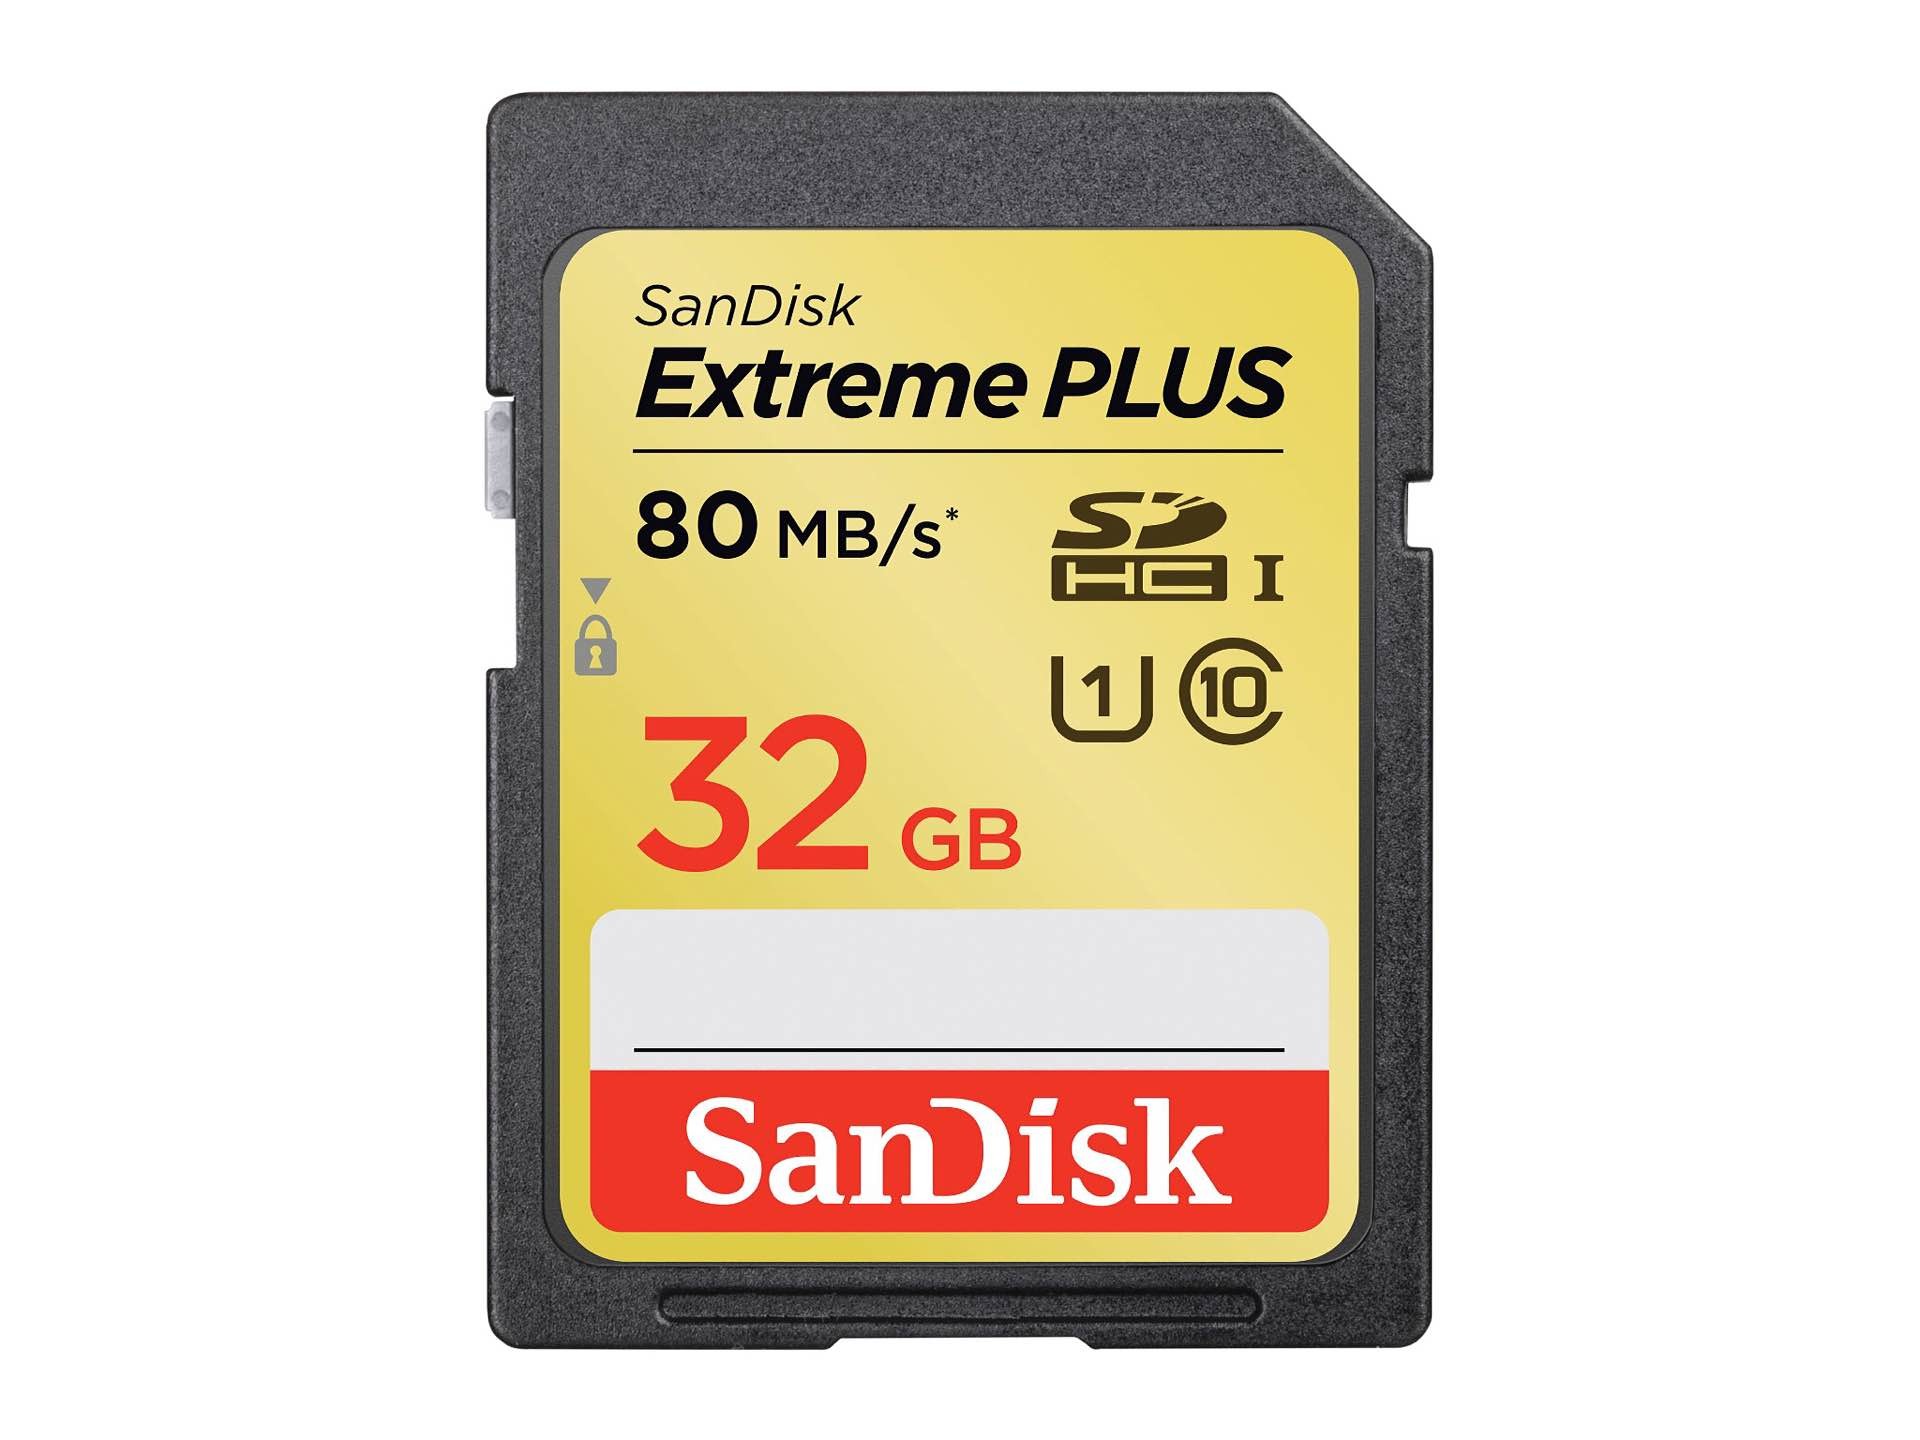 SanDisk's Extreme Plus 32GB SD card. ($31)